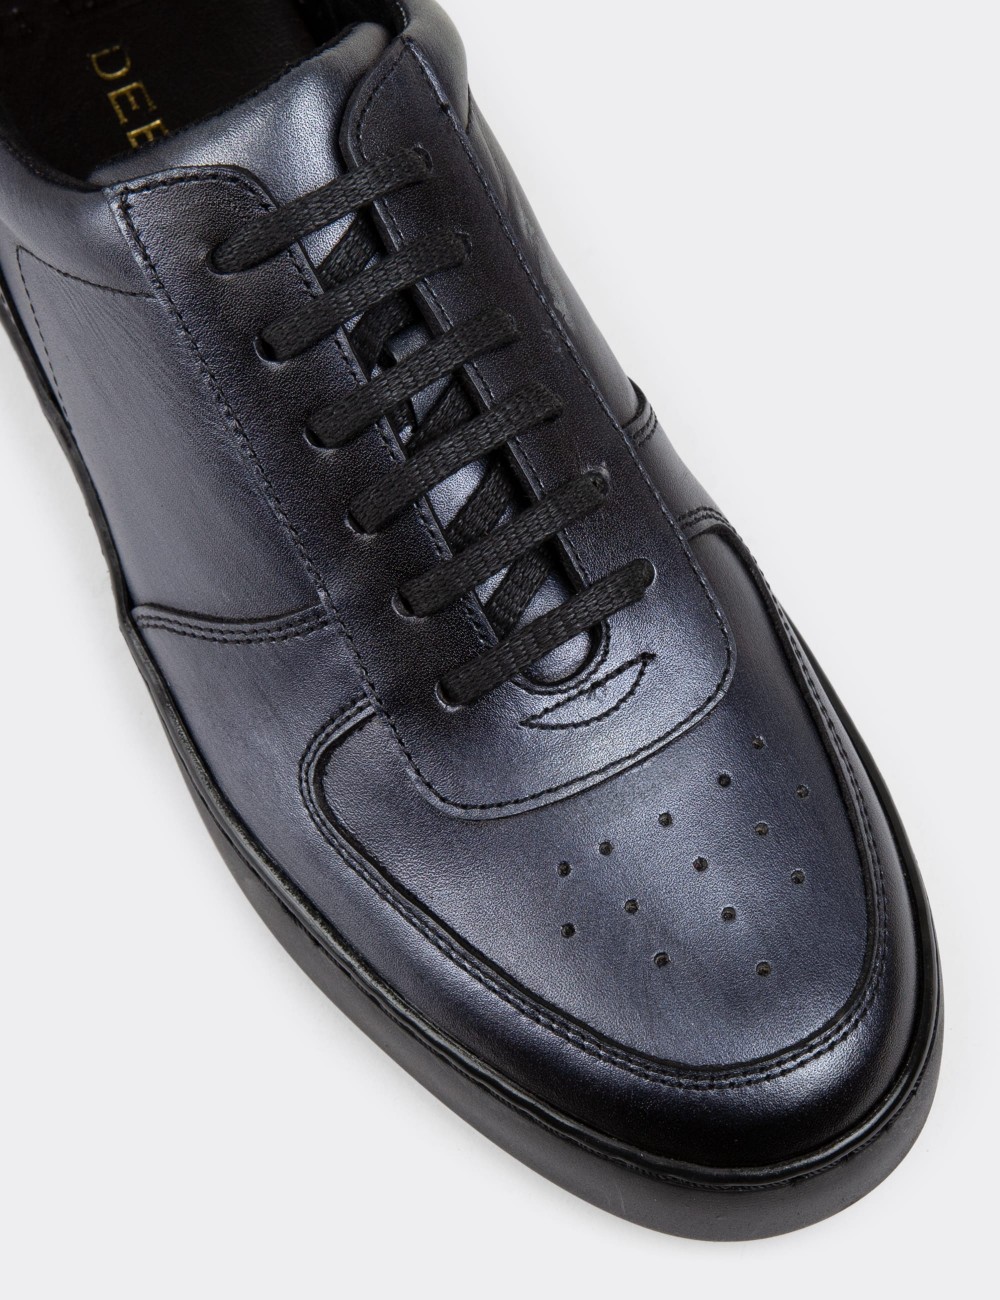 Anthracite Leather Sneakers - 01880MANTC01